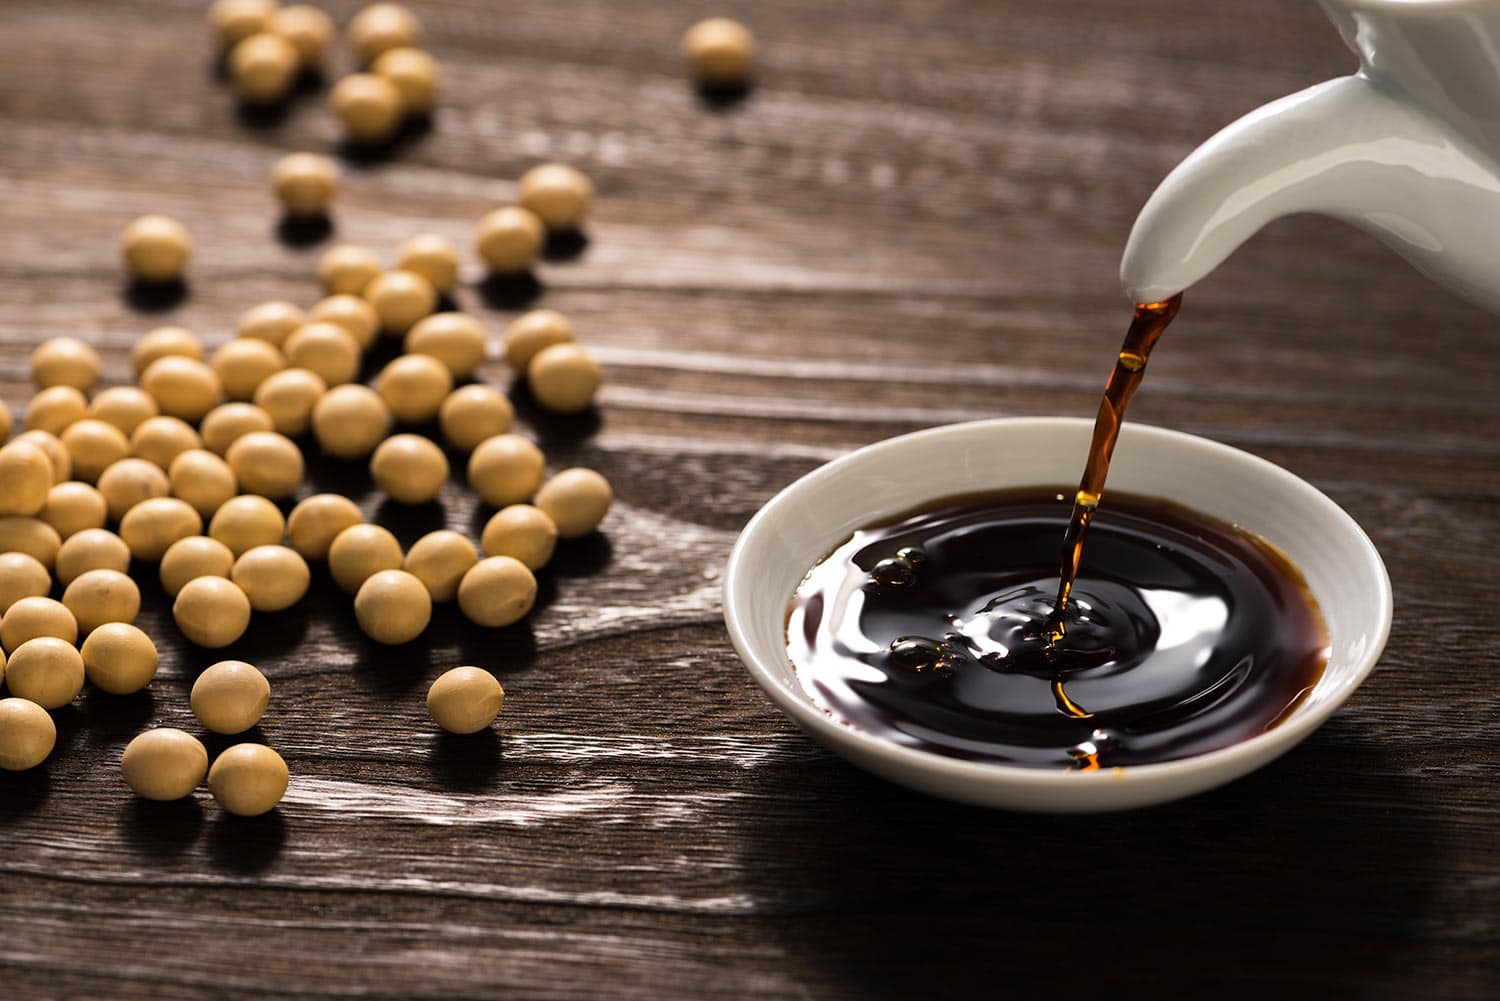 Soy sauce is a traditional fermented seasonings